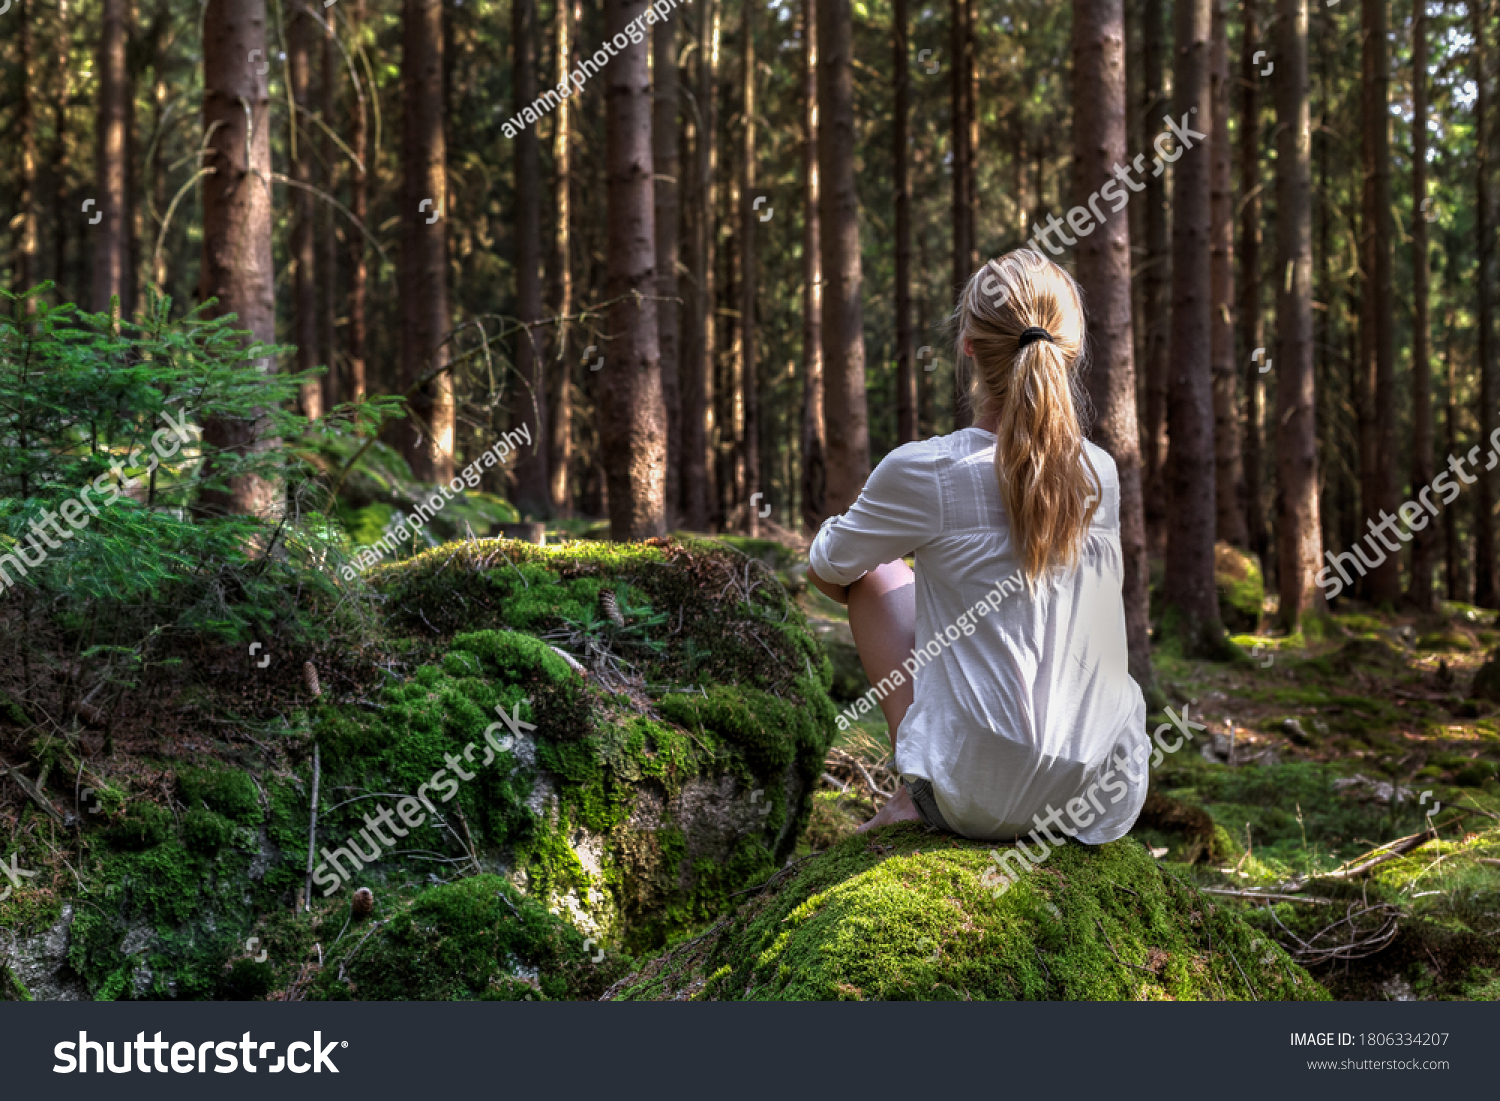 Woman sitting in green forest enjoys the silence and beauty of nature. #1806334207